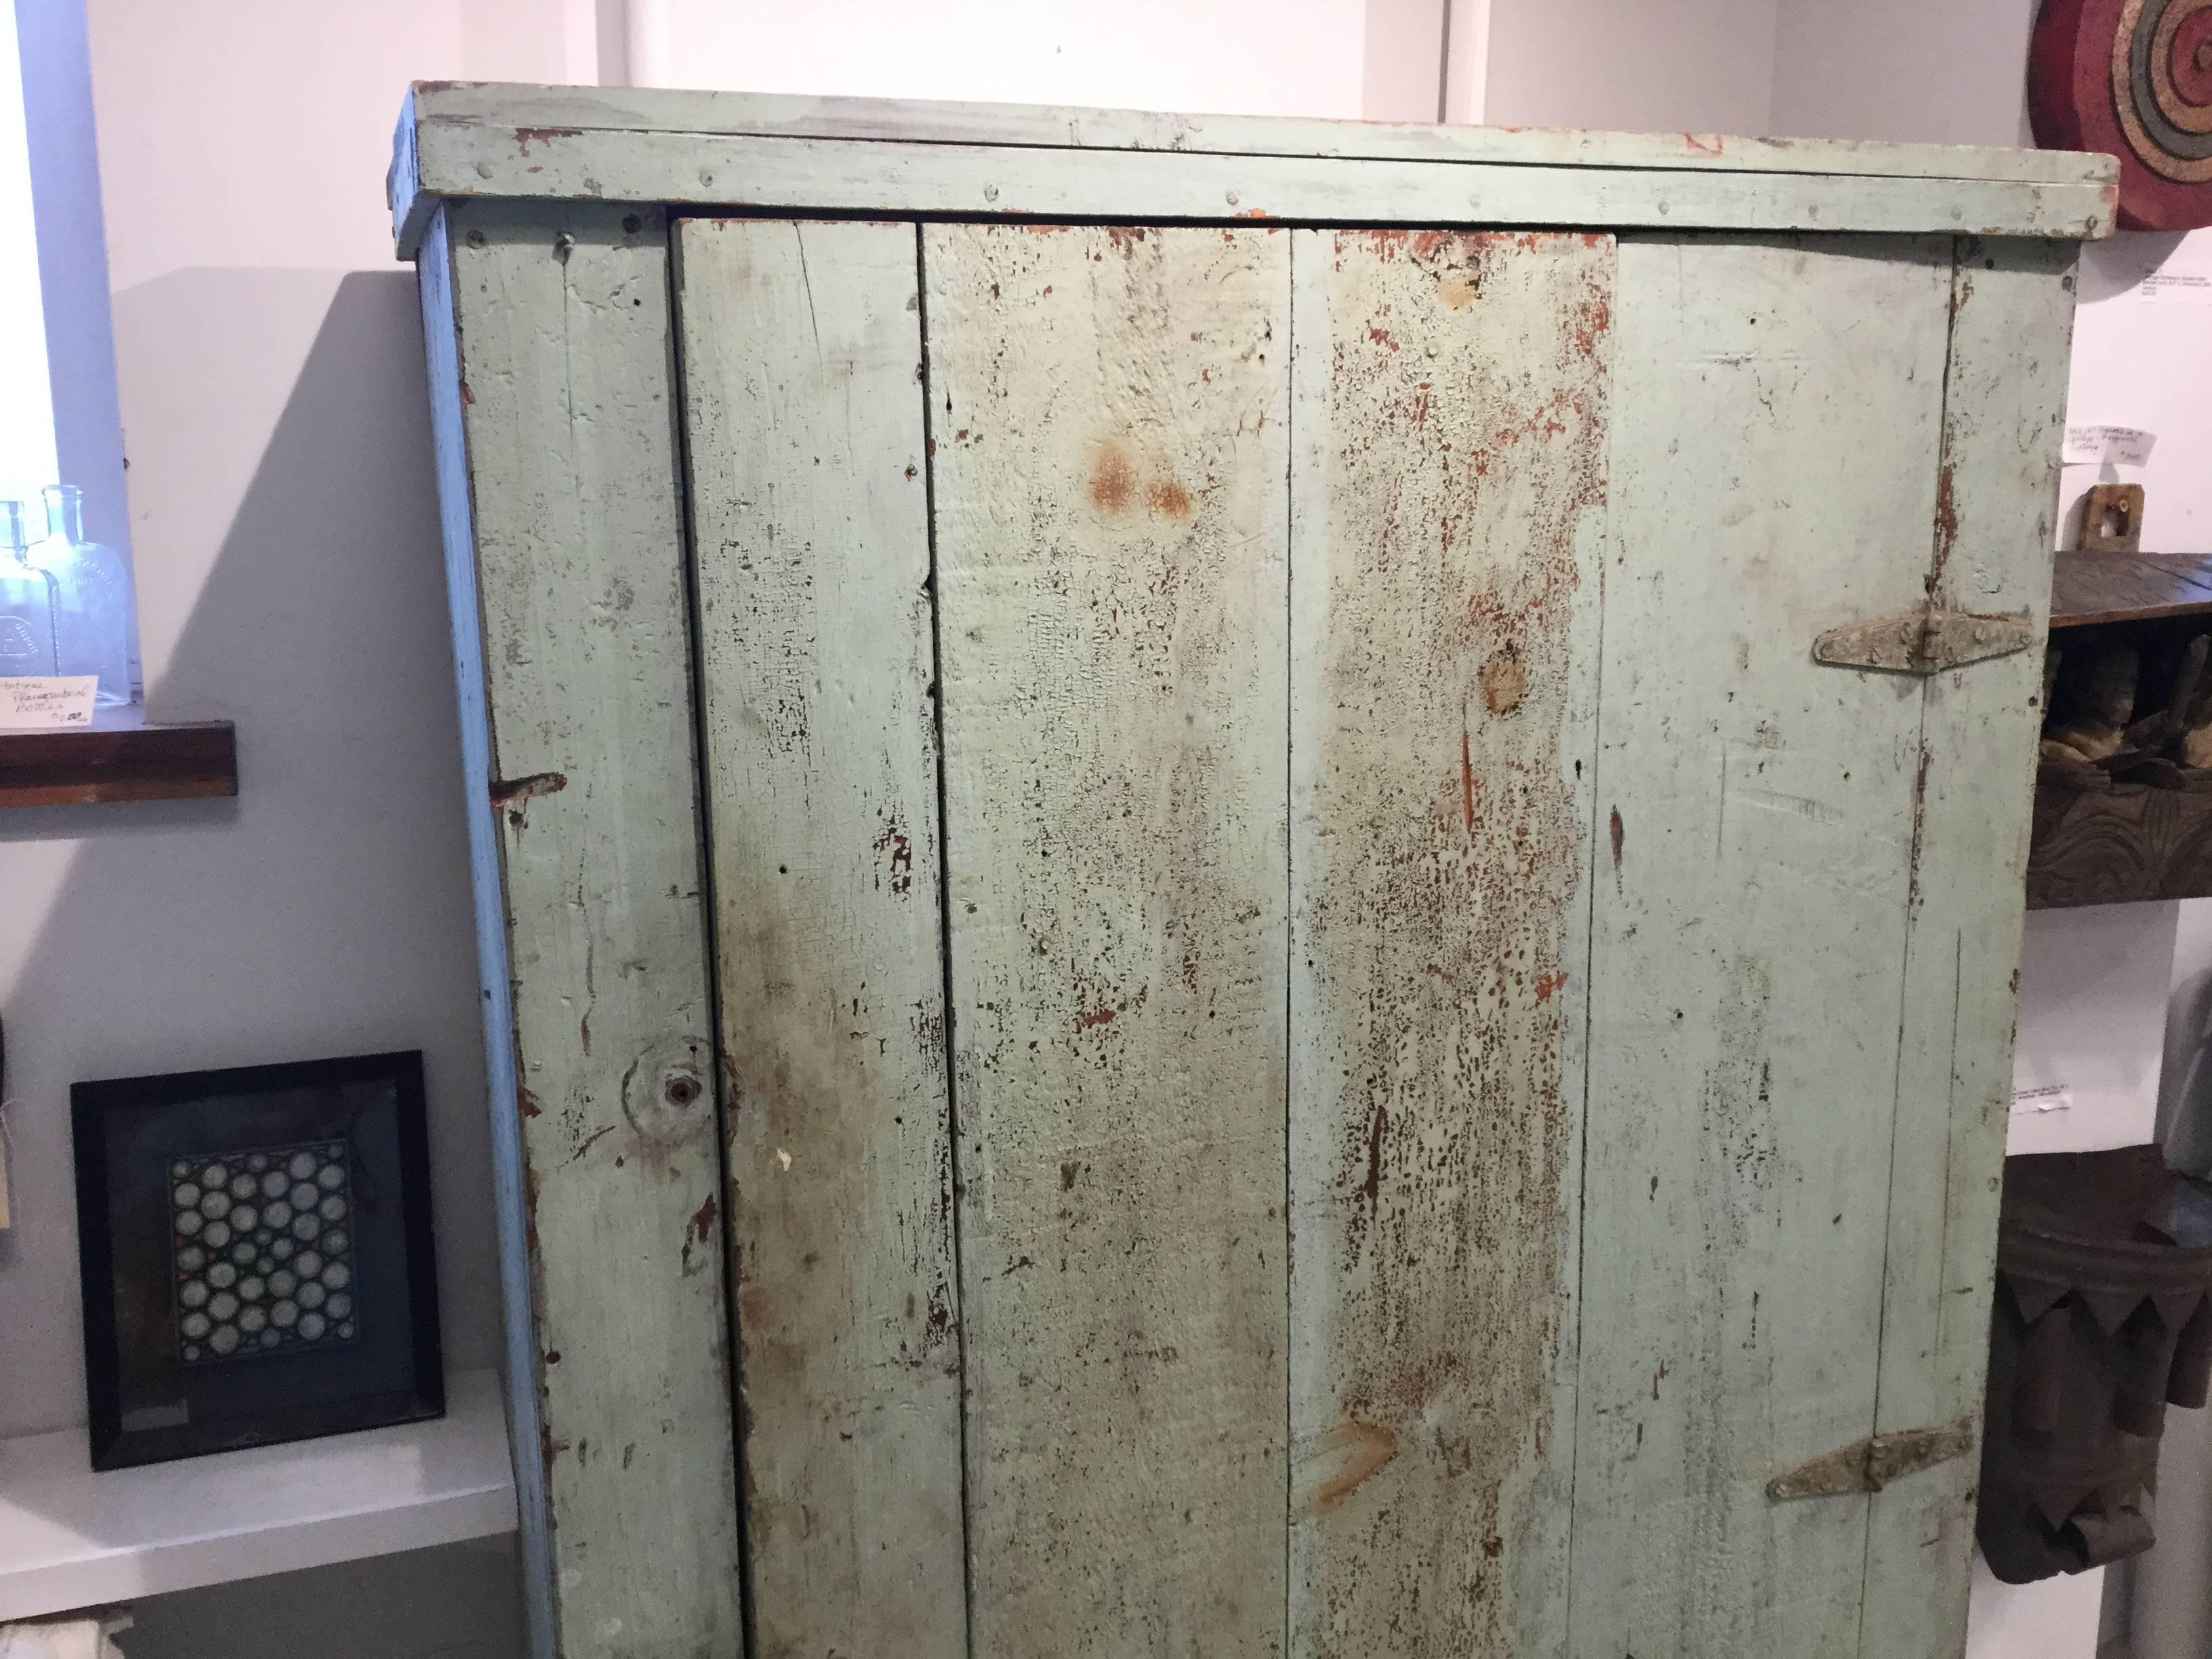 Americana Robins egg blue painted cabinet. It's hard to describe when a utilitarian cabinet like this has the perfect scale proportions and color. The patina is just beautiful and all Paint is original 120-130 years young. There is a drawer on